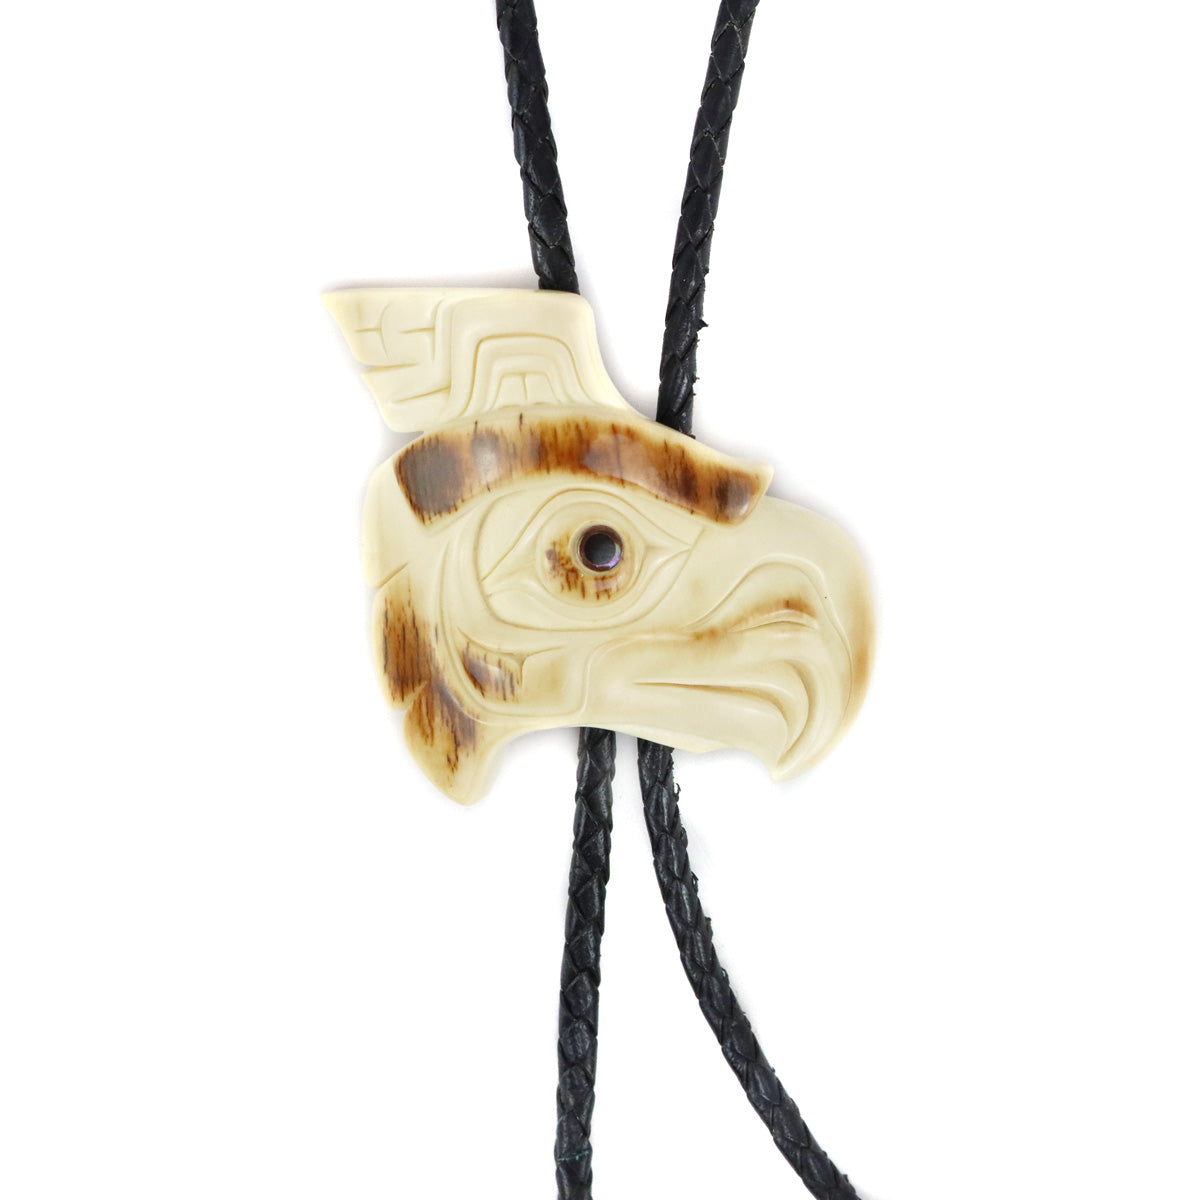 Patty Fawn - Cherokee Antler and Leather Bolo Tie with Carved Eagle Design c. 1990-2000s, 2.25" x 2.5" bolo (J15522-CO-005) 2